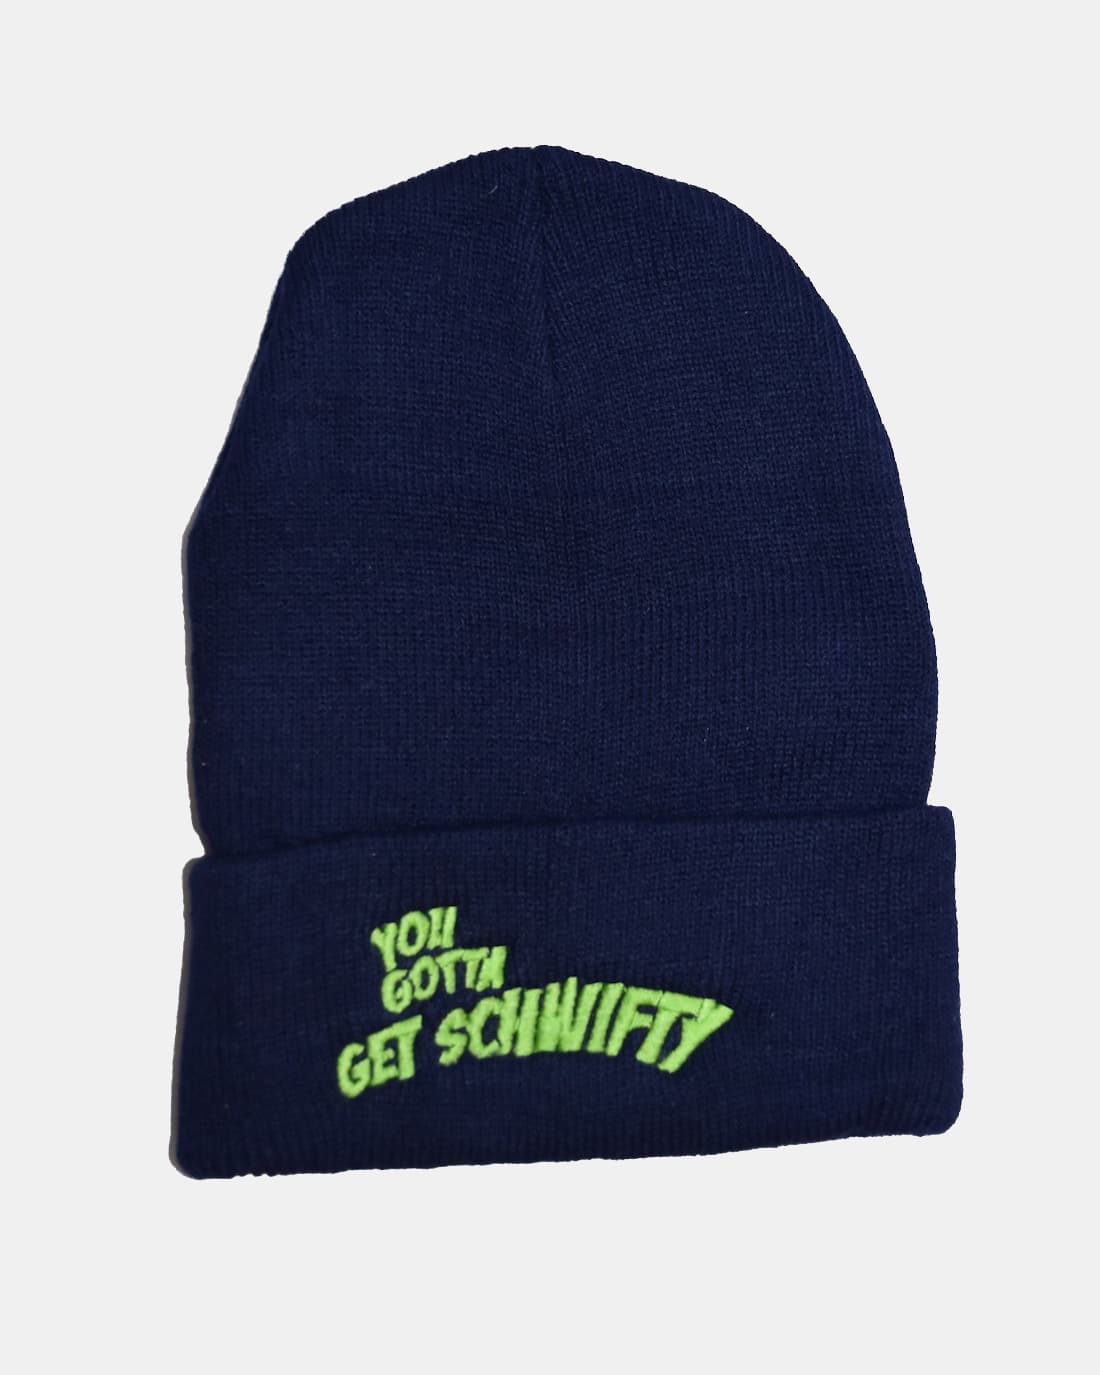 SKA Rick And Morty You Gotta Get Schwifty Hat Warm Winter Knitted Skullies Beanies Knit Caps